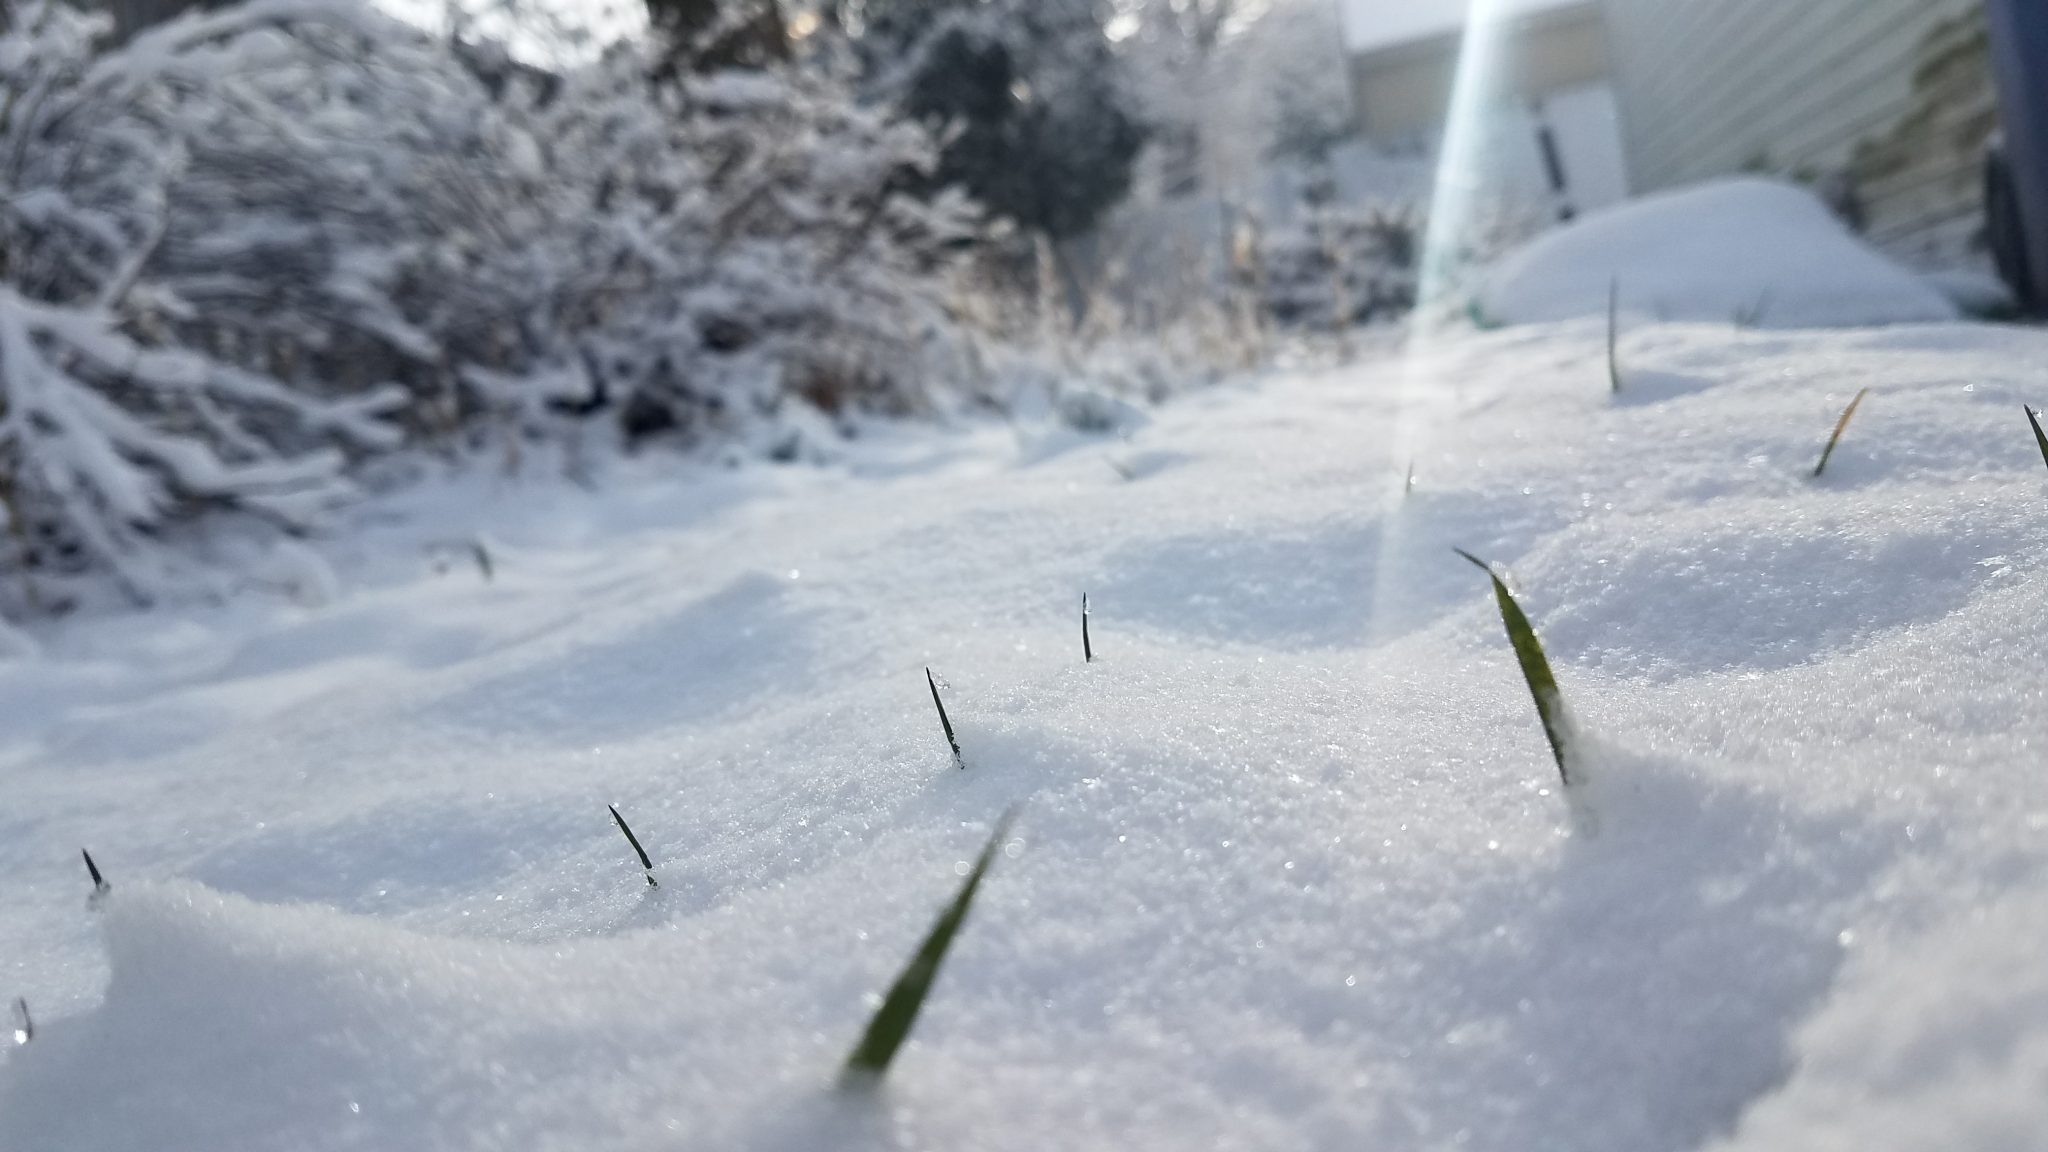 Grass coming up through the snow